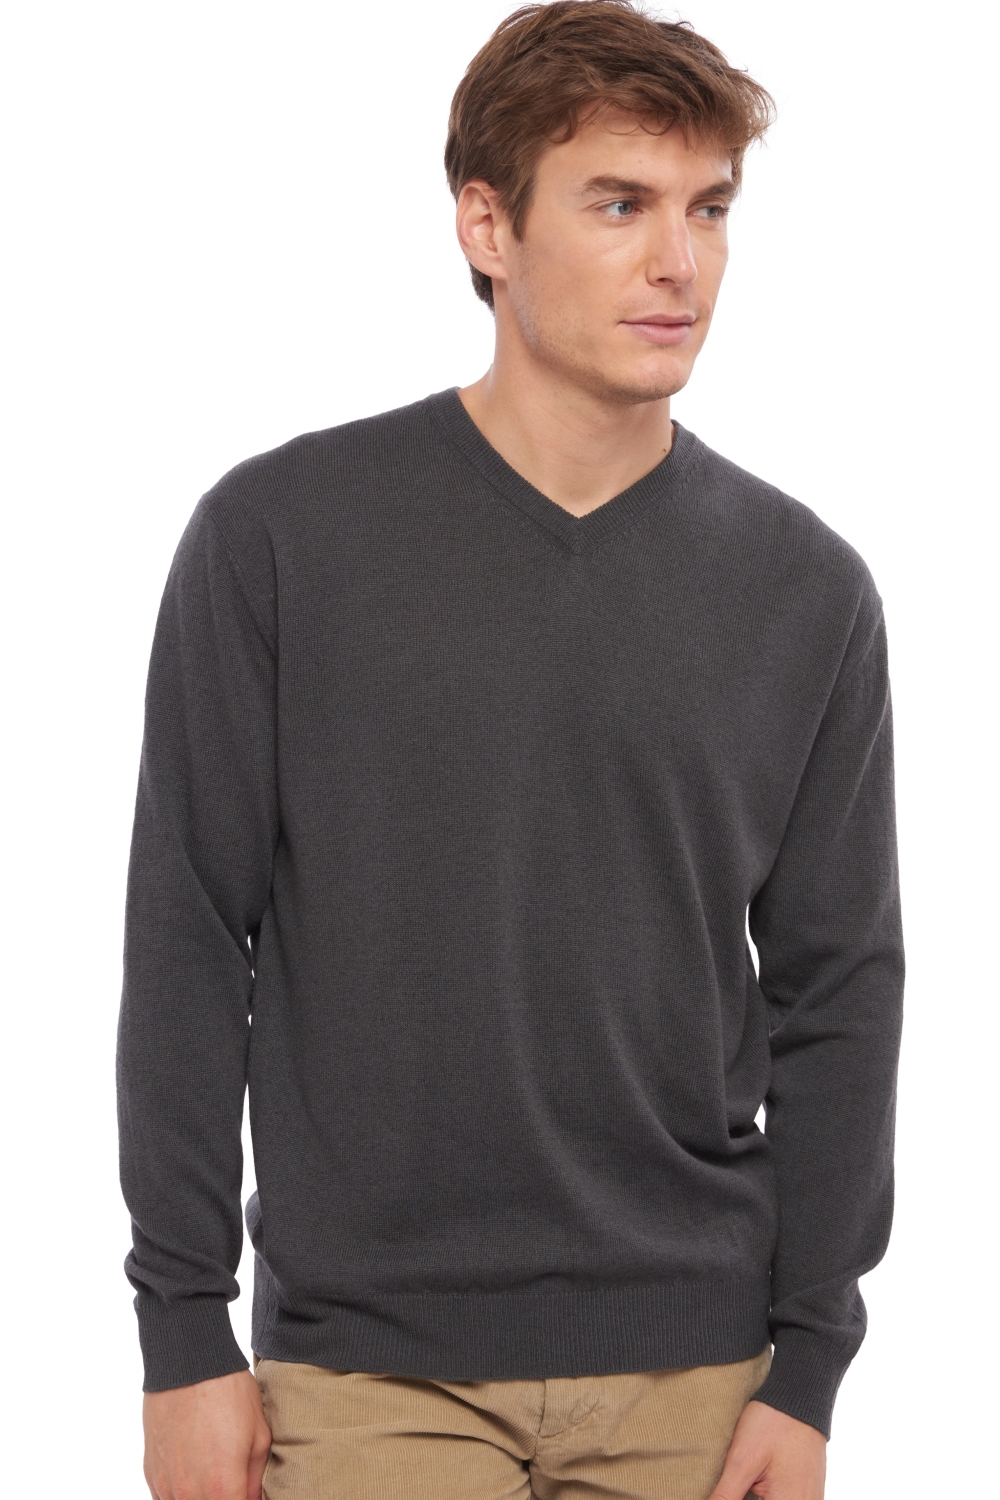 Cachemire pull homme col v gaspard anthracite 2xl